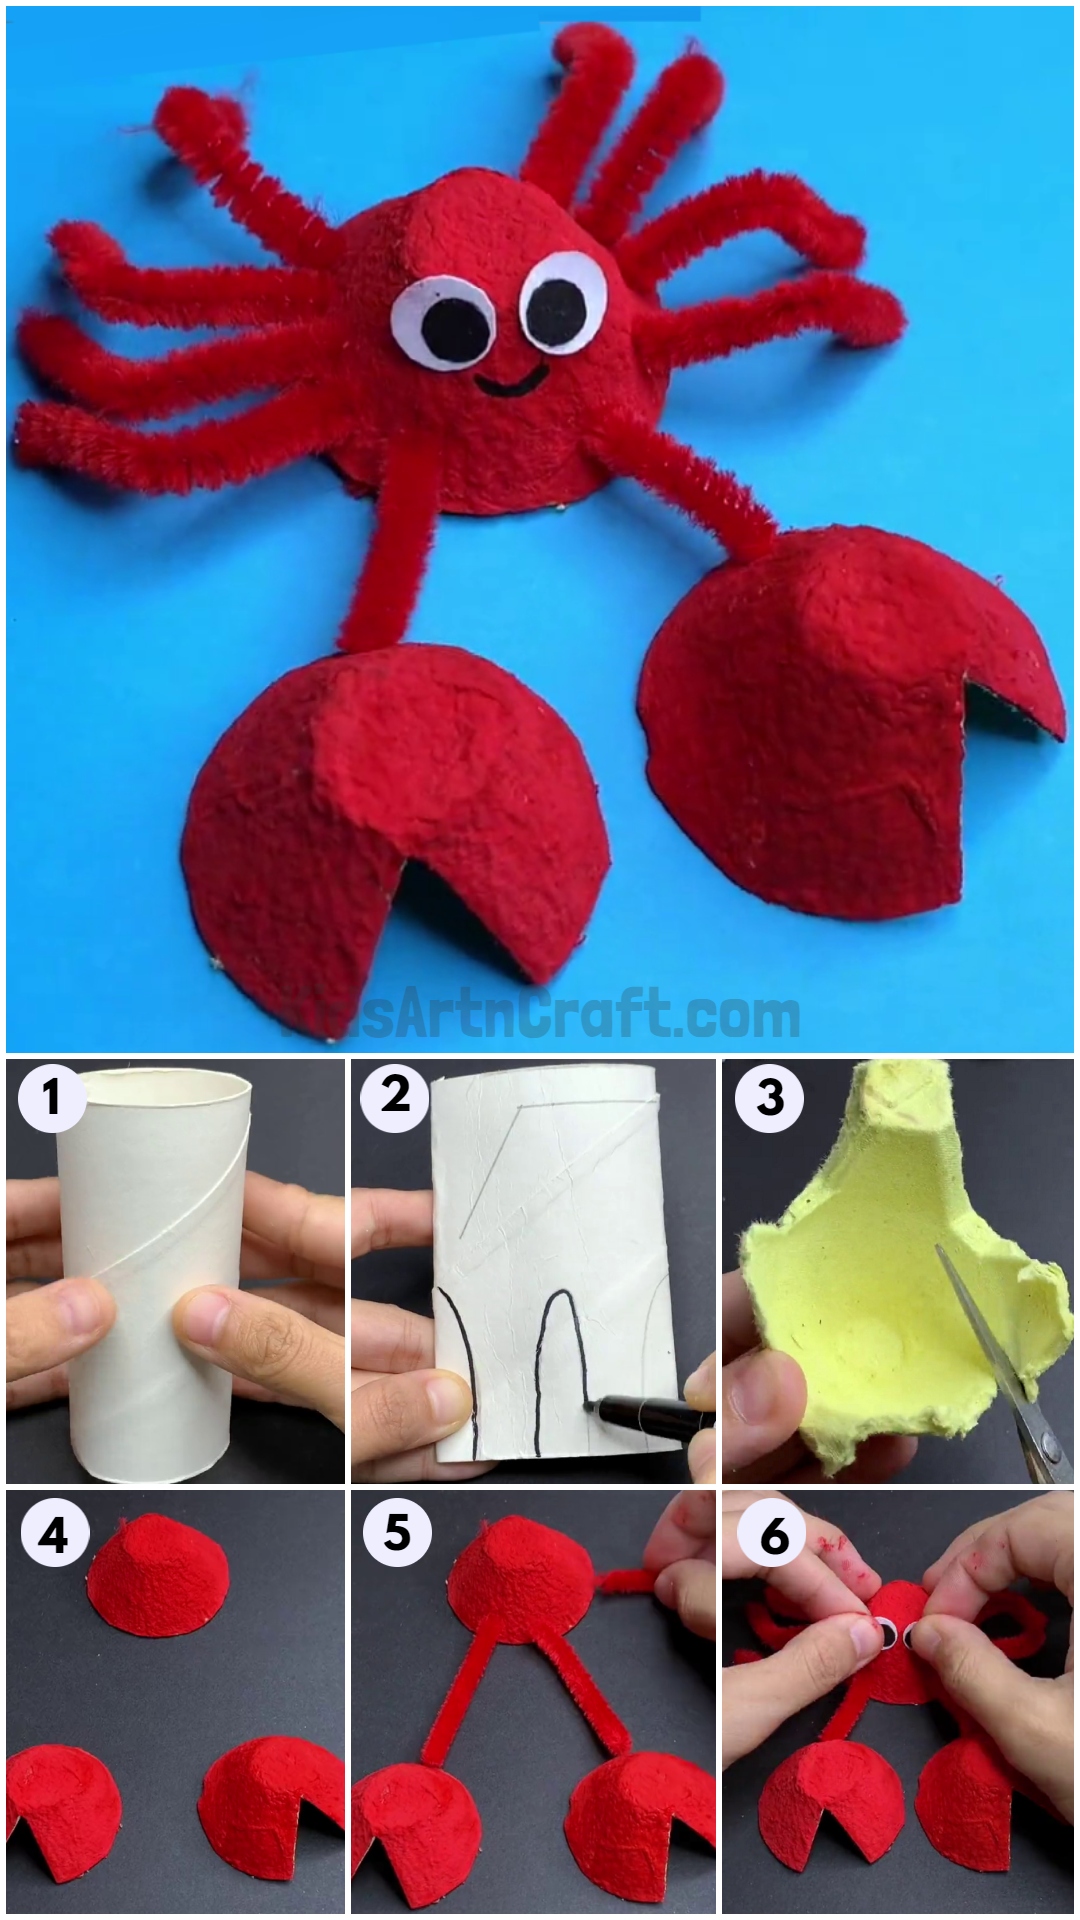 Egg Carton Crab Step-by-Step Tutorial For Kids